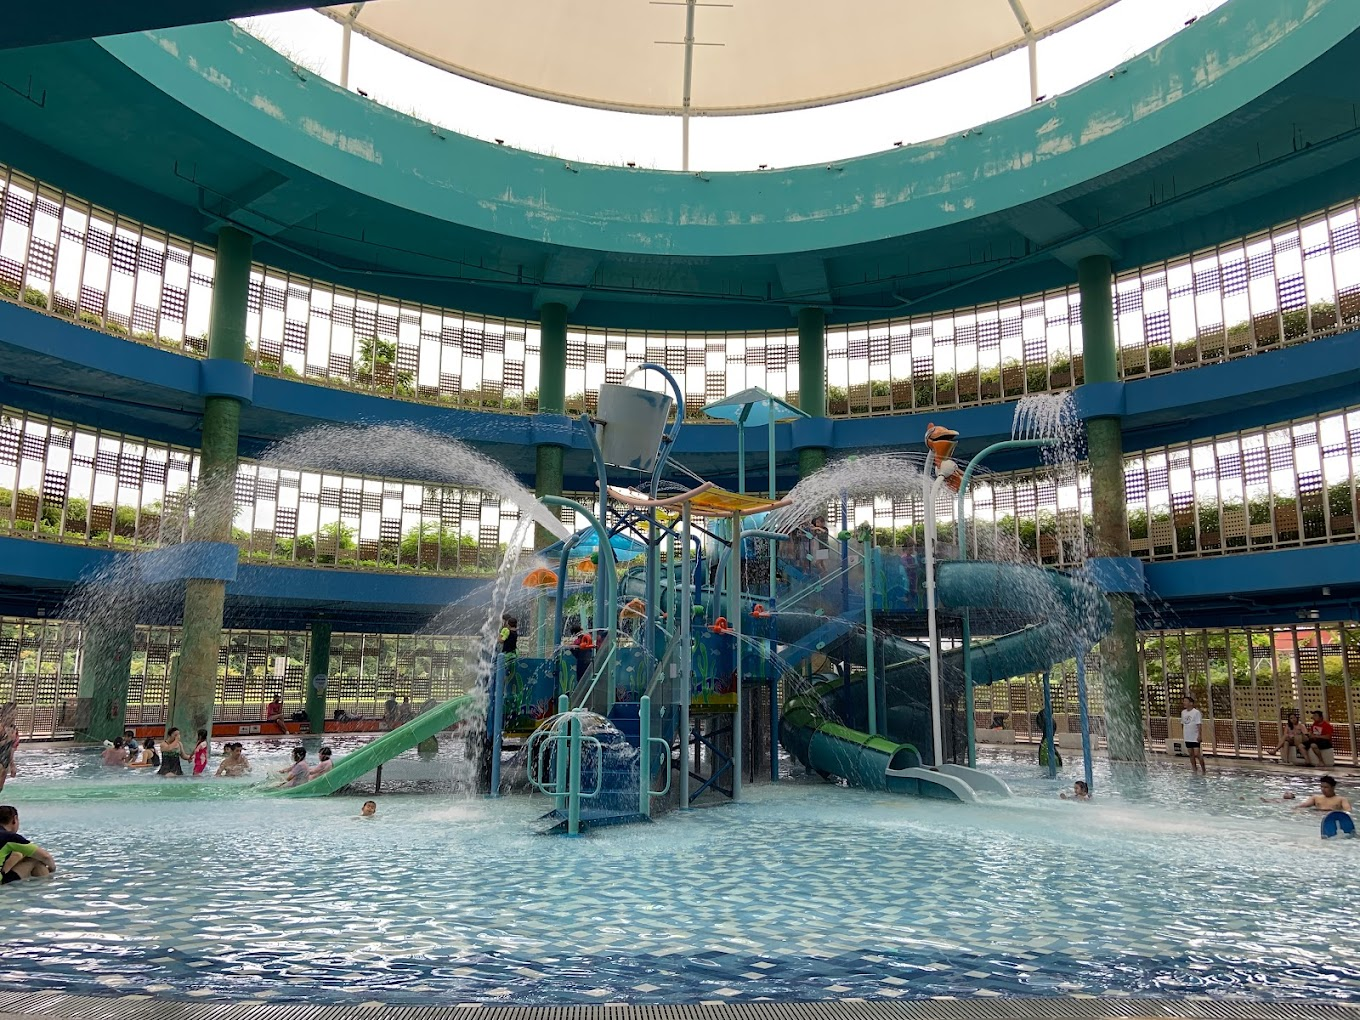 Indoor water playground in Punggol, Safra, featuring 5 slides, 8 play decks connected by climbing structures, and a toddler wading area.